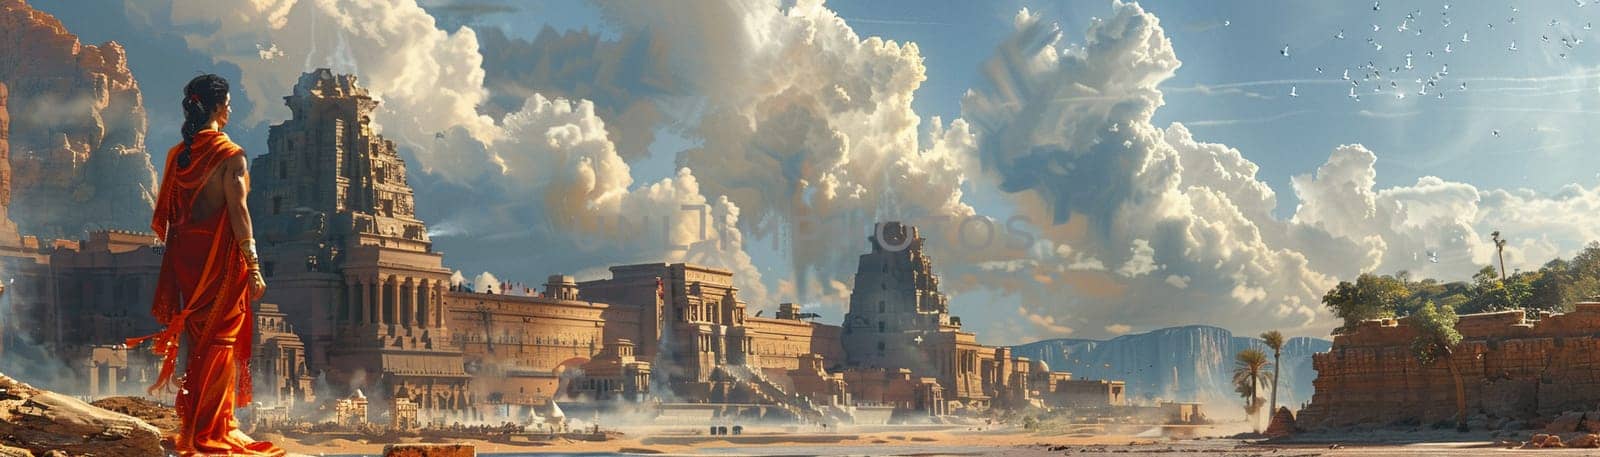 Ancient temple explorer scene created with a mythic and adventurous tone, using rich, earthy colors.